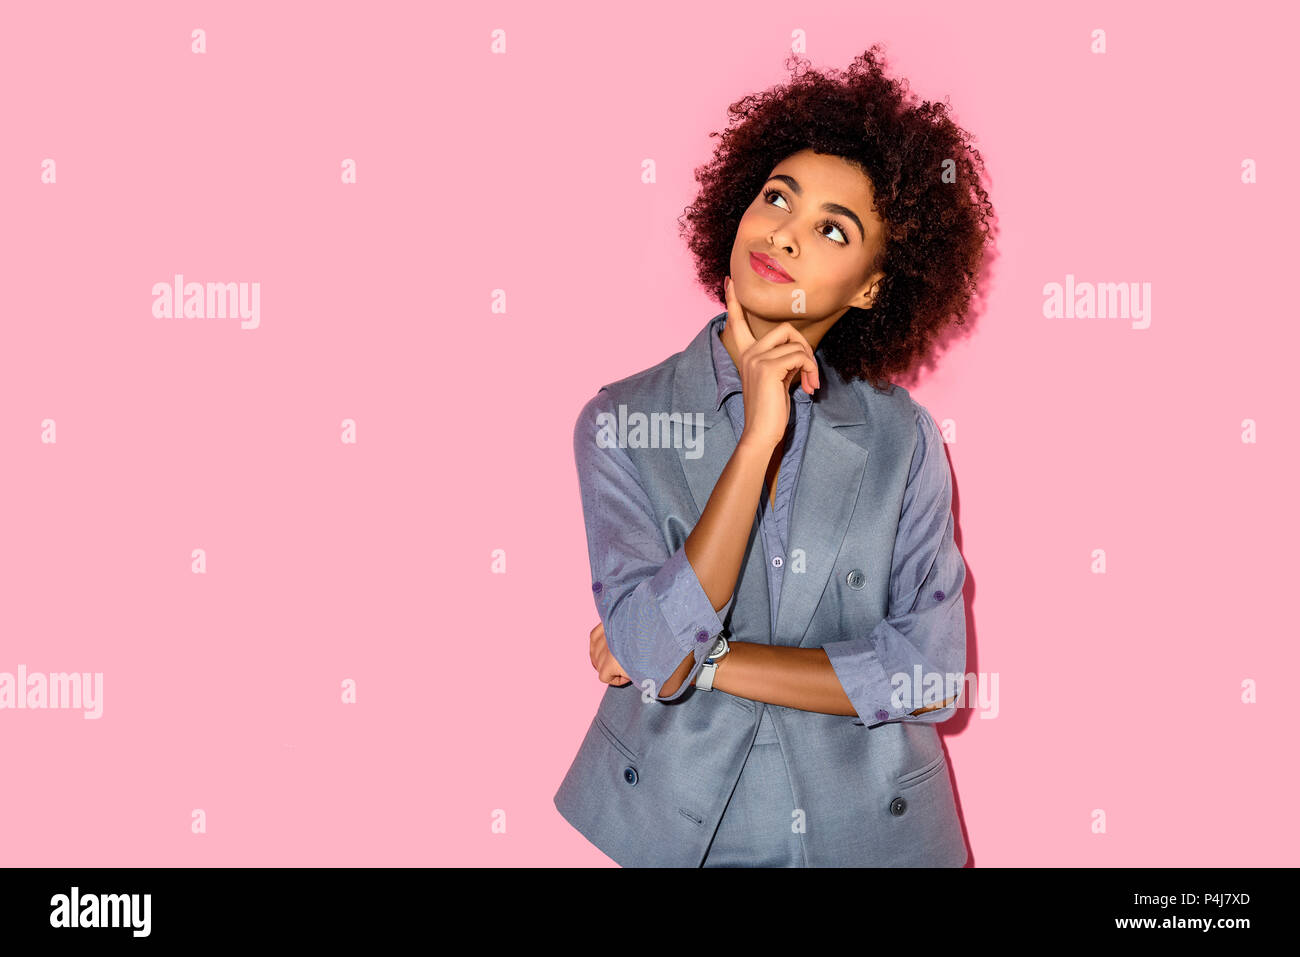 Young african amercian girl with hand on chin wearing grey suit on pink background Stock Photo